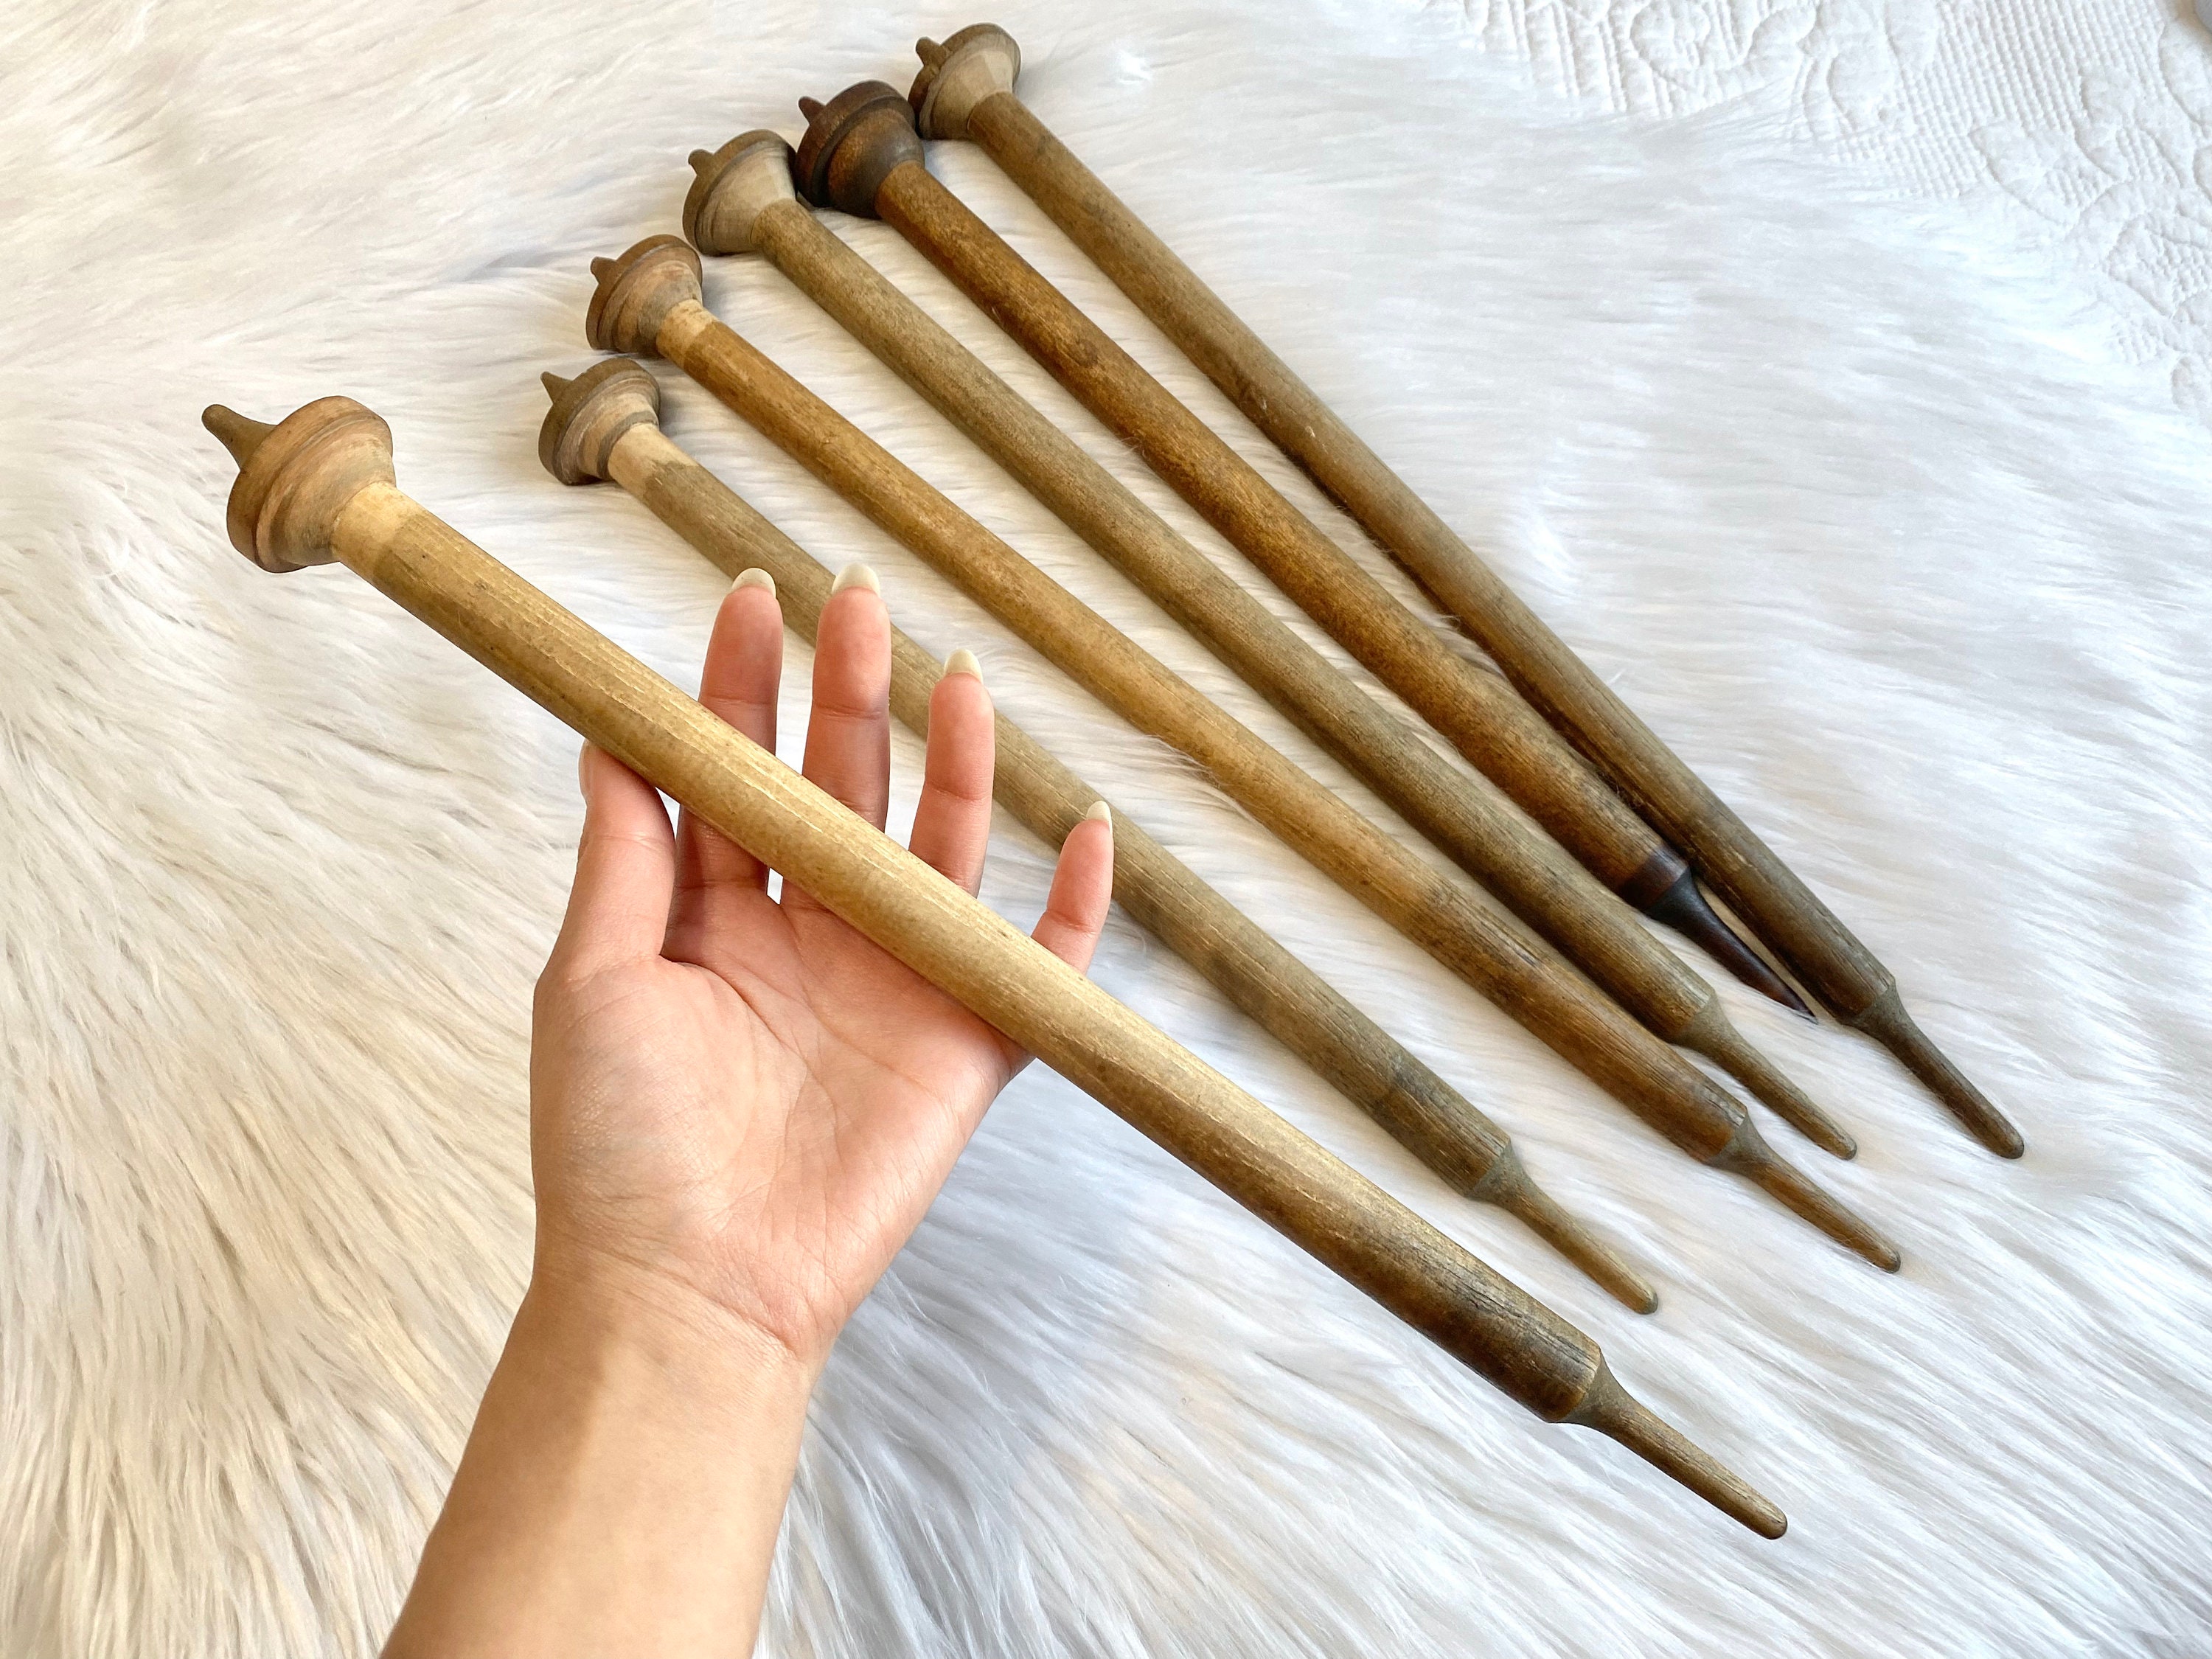 Watercolor Oldfashioned Wooden Knitting Needles Tool For Hand